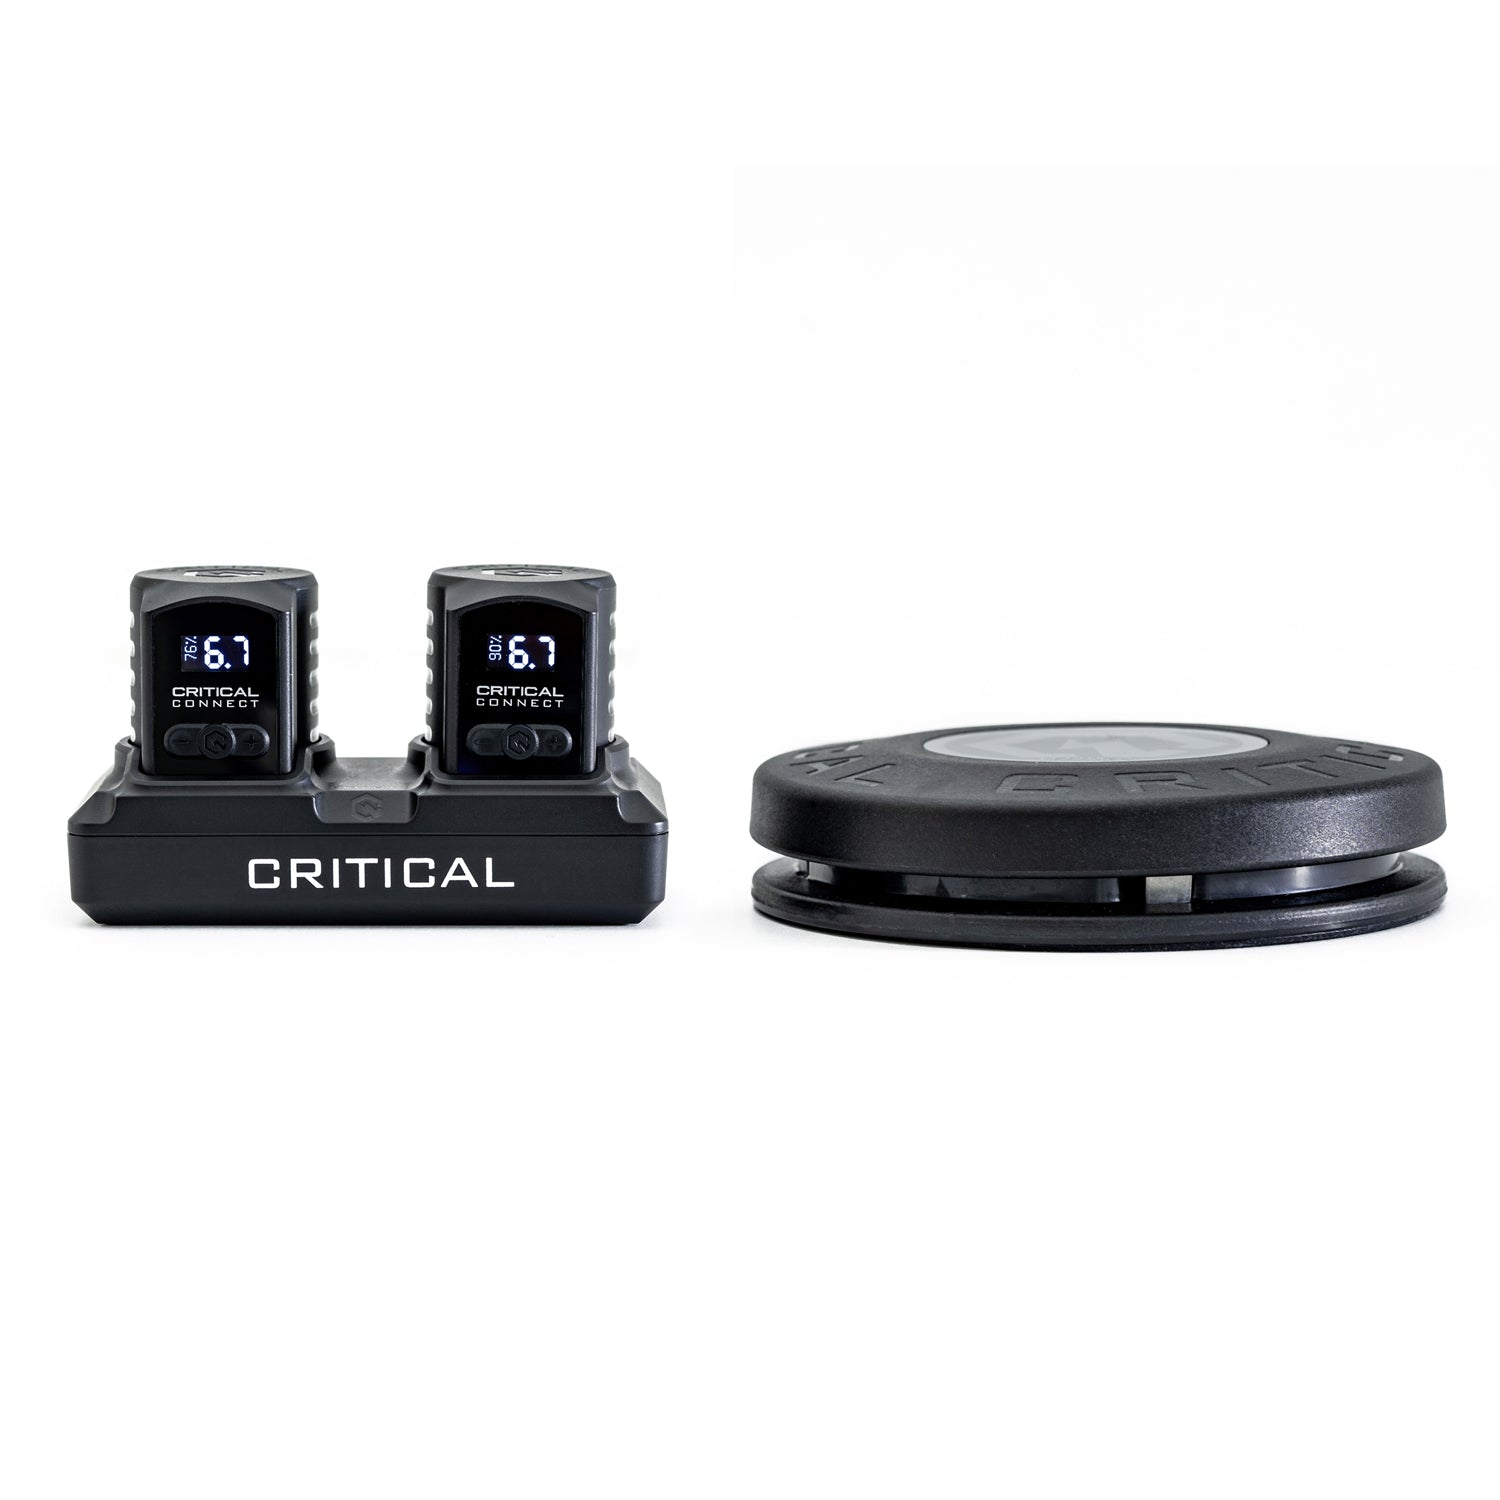 A Critical Connect Bundle for PMU artists with Shorty Batteries, dock, and foot pedal.